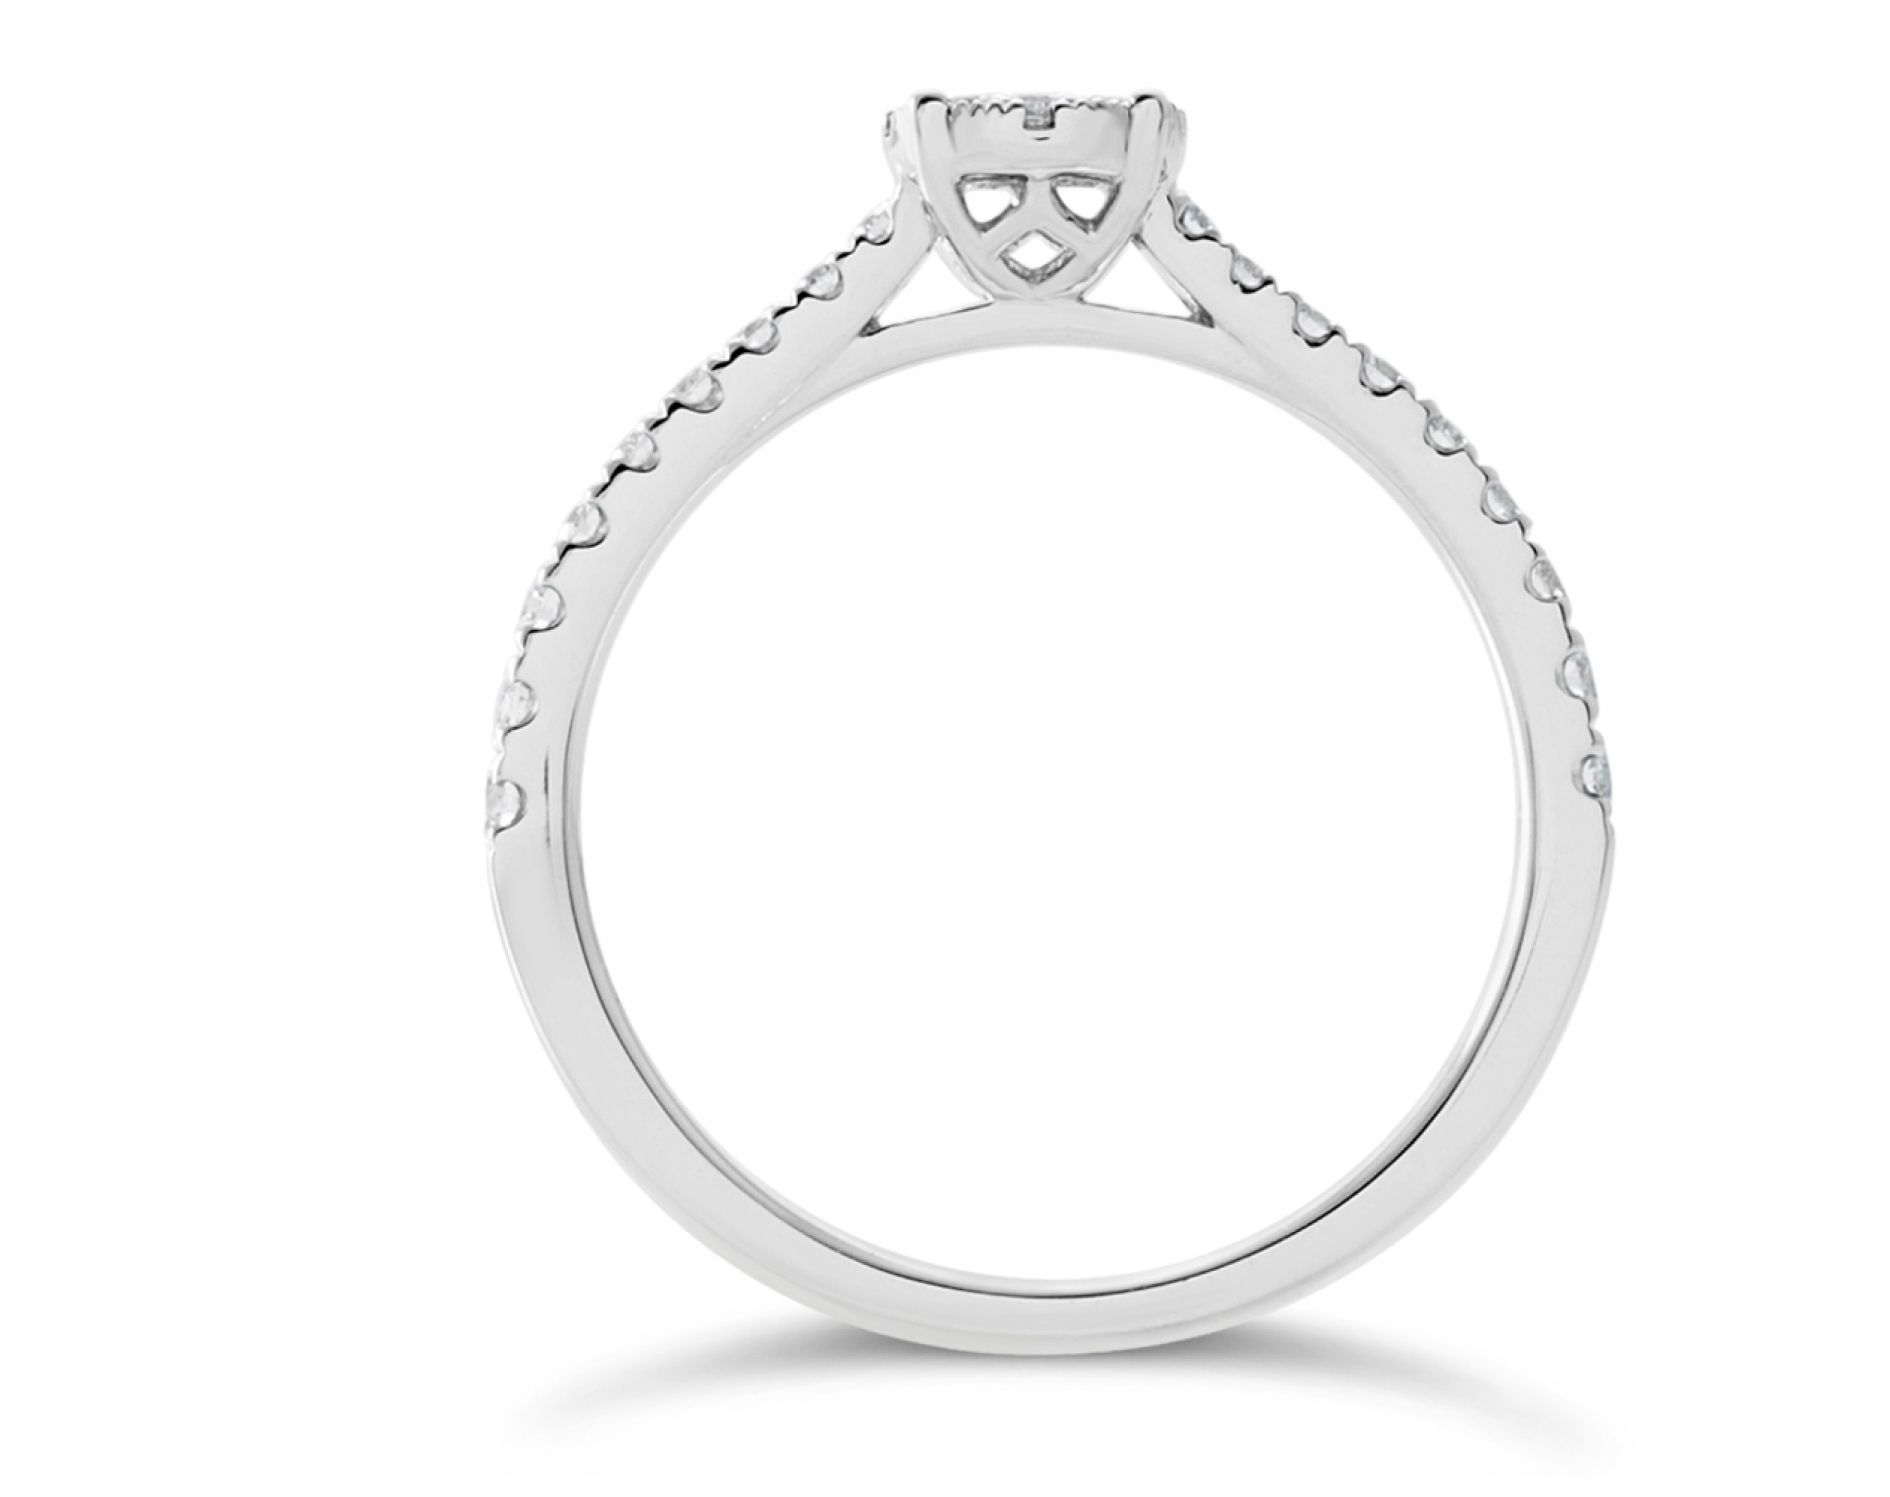 18k white gold cathedral halo illusion set engagement ring with round pave set sidestones Photos & images